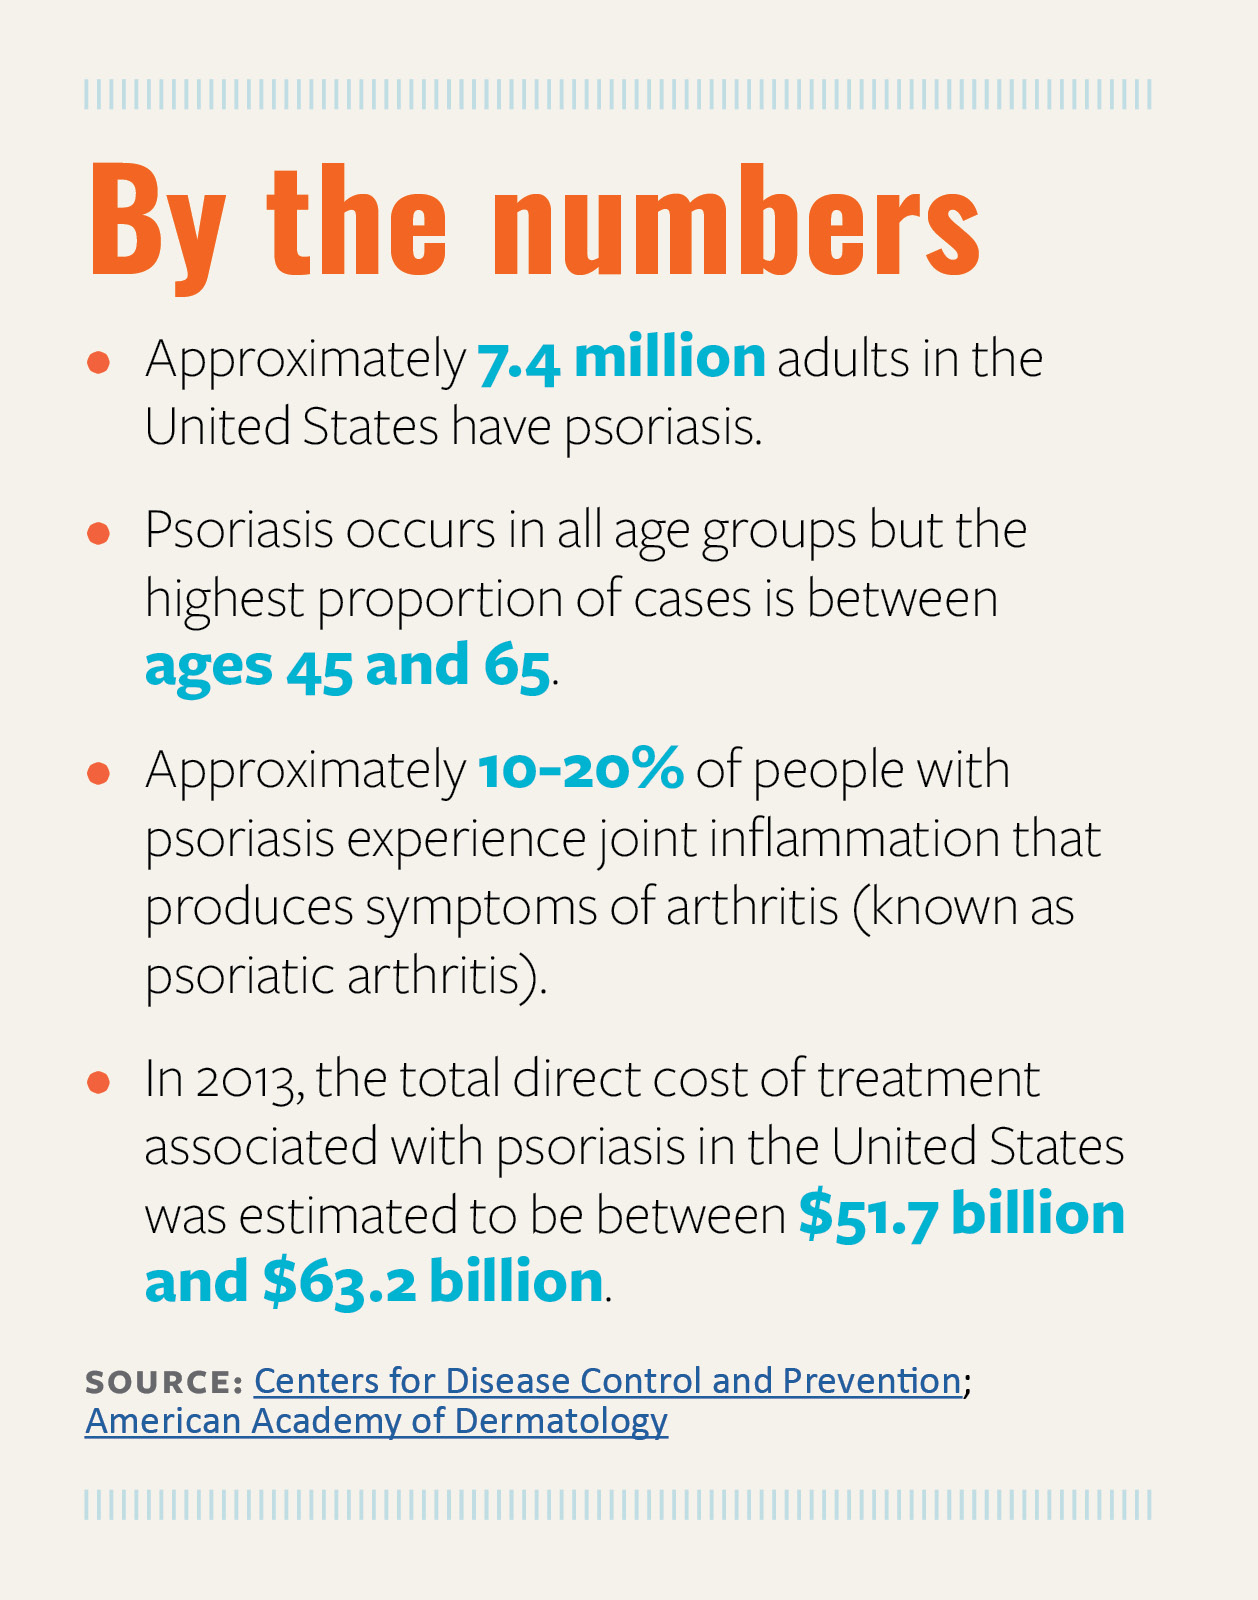 By the numbers: Approximately 7.4 million adults in the United States have psoriasis. Psoriasis occurs in all age groups but the highest proportion of cases is between ages 45 and 65. Approximately 10-20% of people with psoriasis experience joint inflammation that produces symptoms of arthritis (known as psoriatic arthritis). In 2013, the total direct cost of treatment associated with psoriasis in the United States was estimated to be between $51.7 billion and $63.2 billion. SOURCES: Centers for Disease Control and Prevention; American Academy of Dermatology.